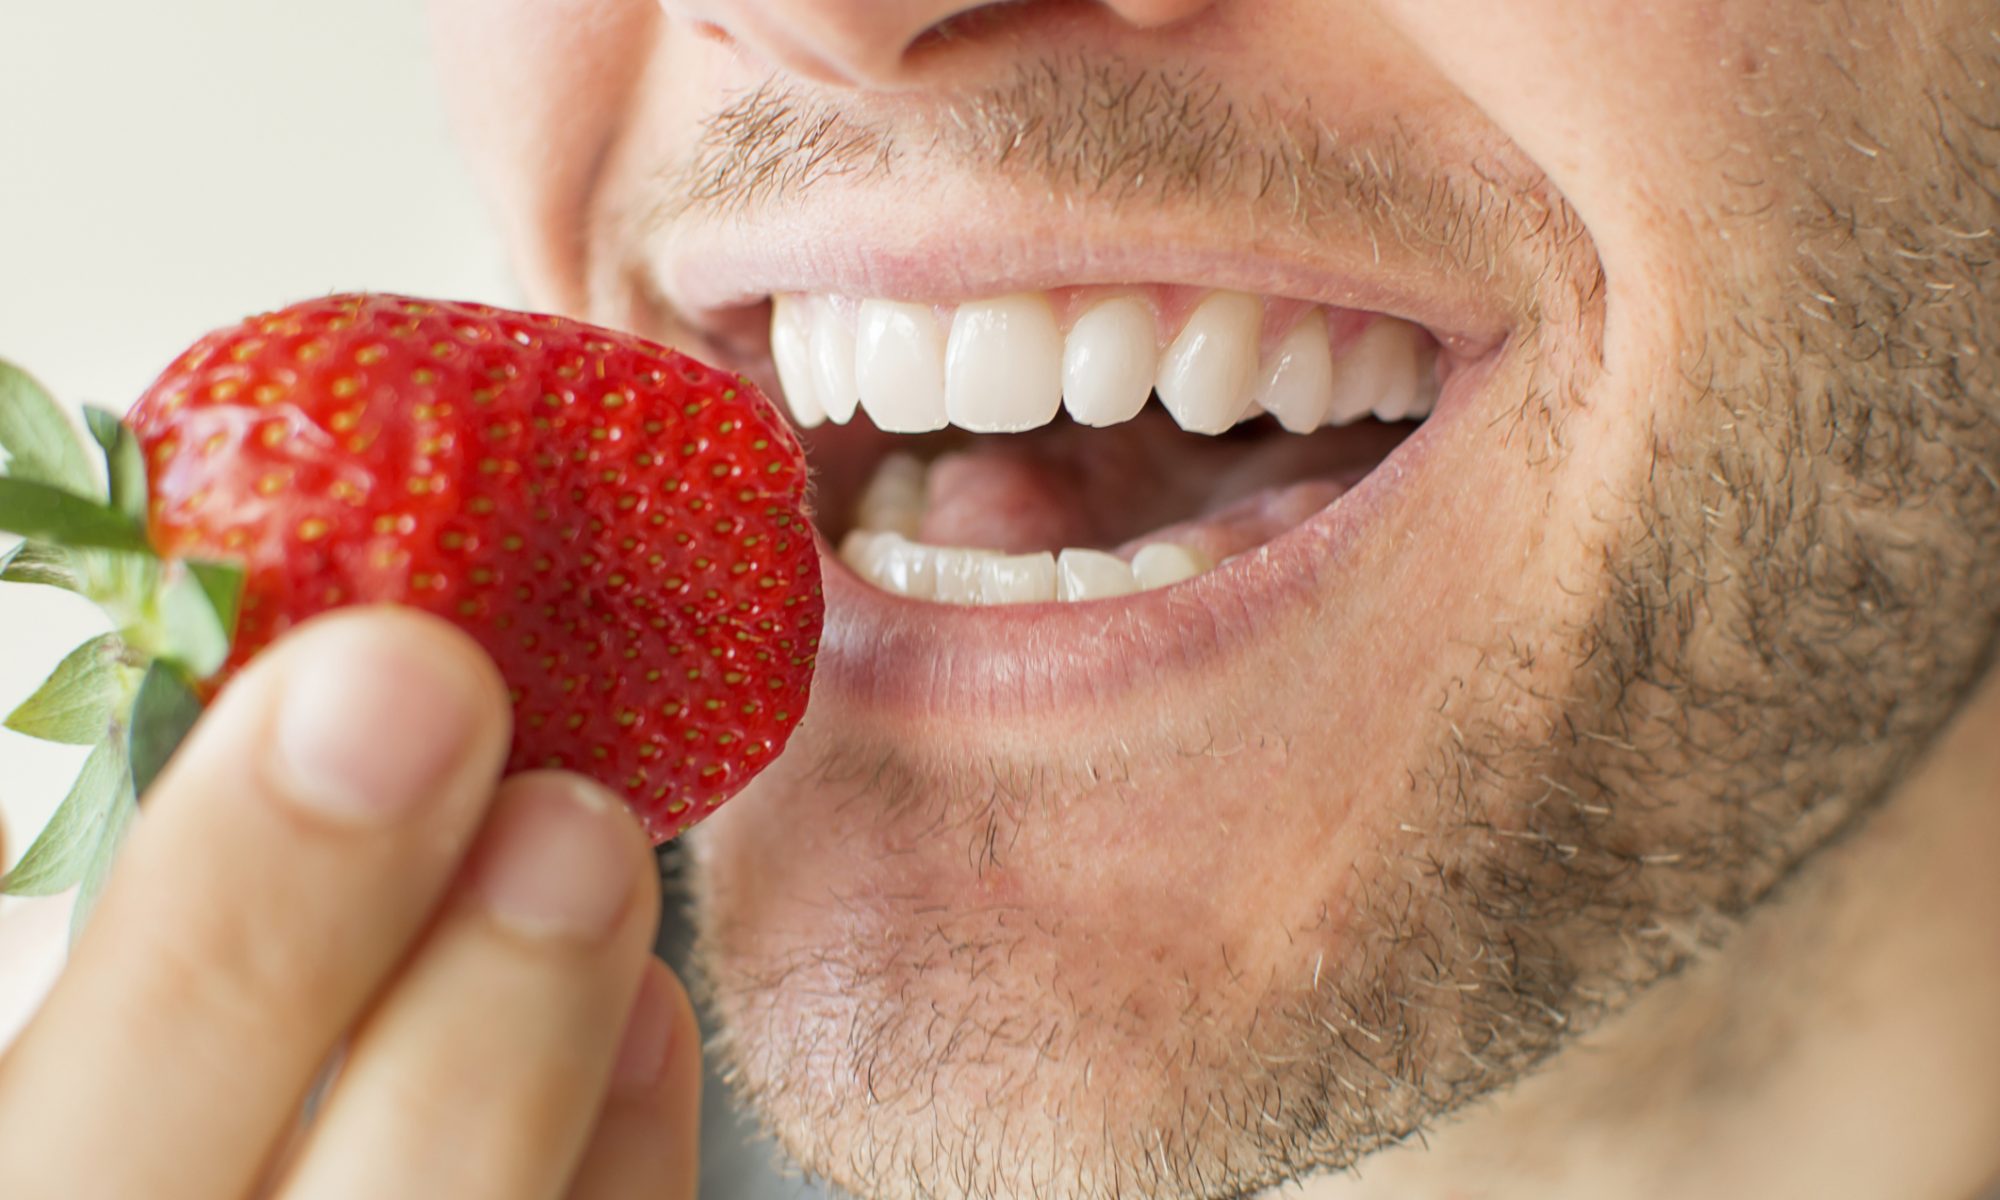 A man eating a strawberry to show the importance of maintaining a proper diet for oral health